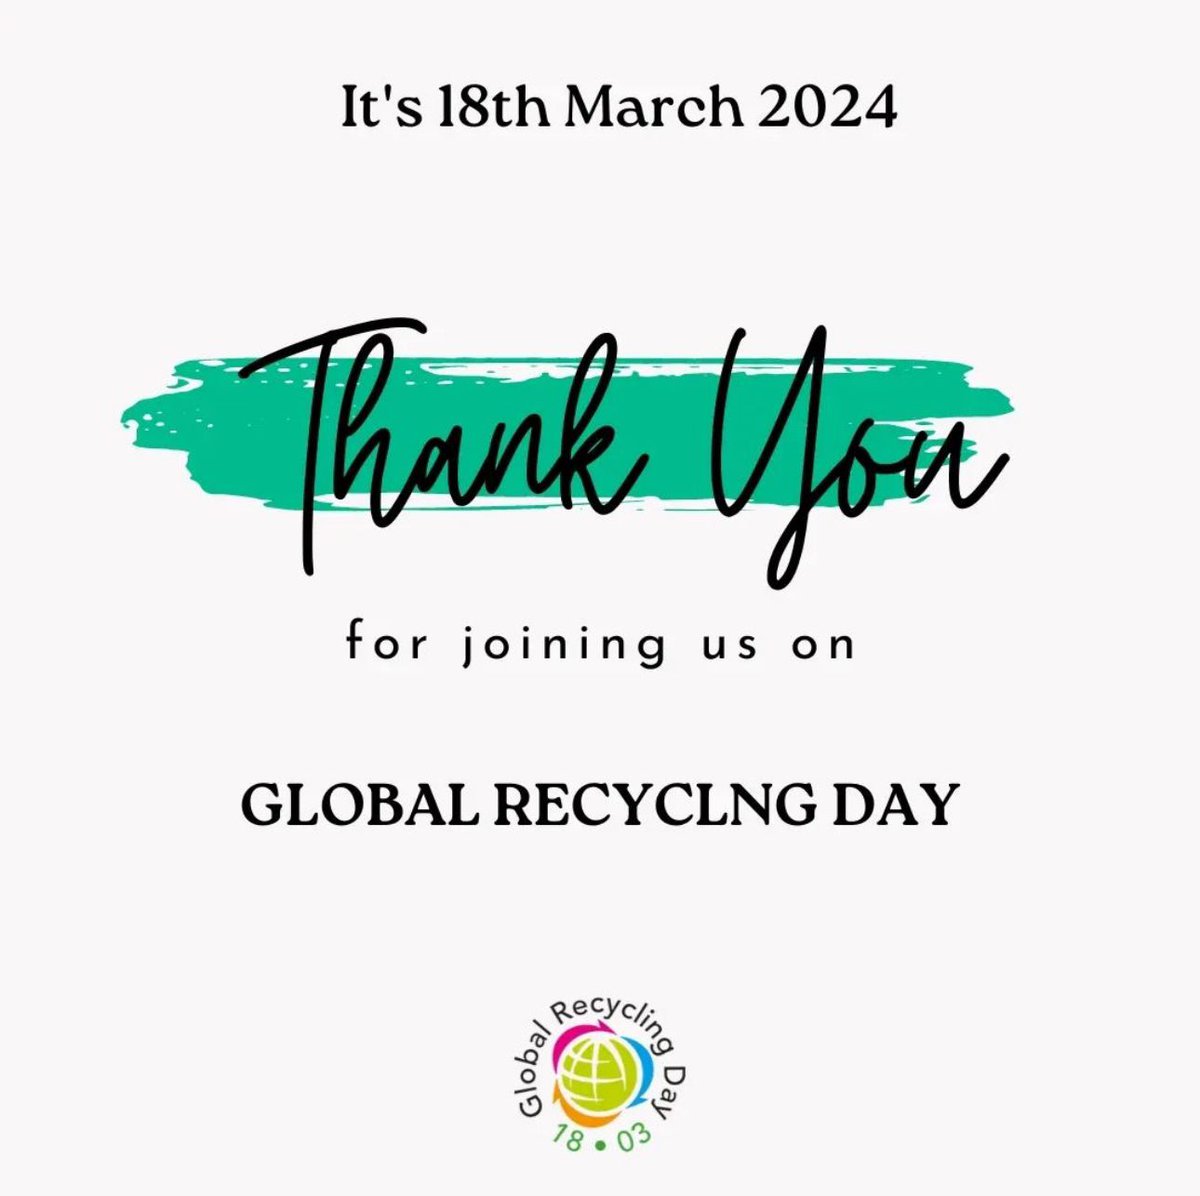 #ThankYou #Youth #Schools #Universities #NGOS #Institutions #Businesses #Corporates #Municipalities #TradeAssociations #MediaColleagues #Editorials #Magazines for sharing stories celebrating #GlobalRecyclingDay. BY working #together #WeCreateSolutions Your #Steps are important.